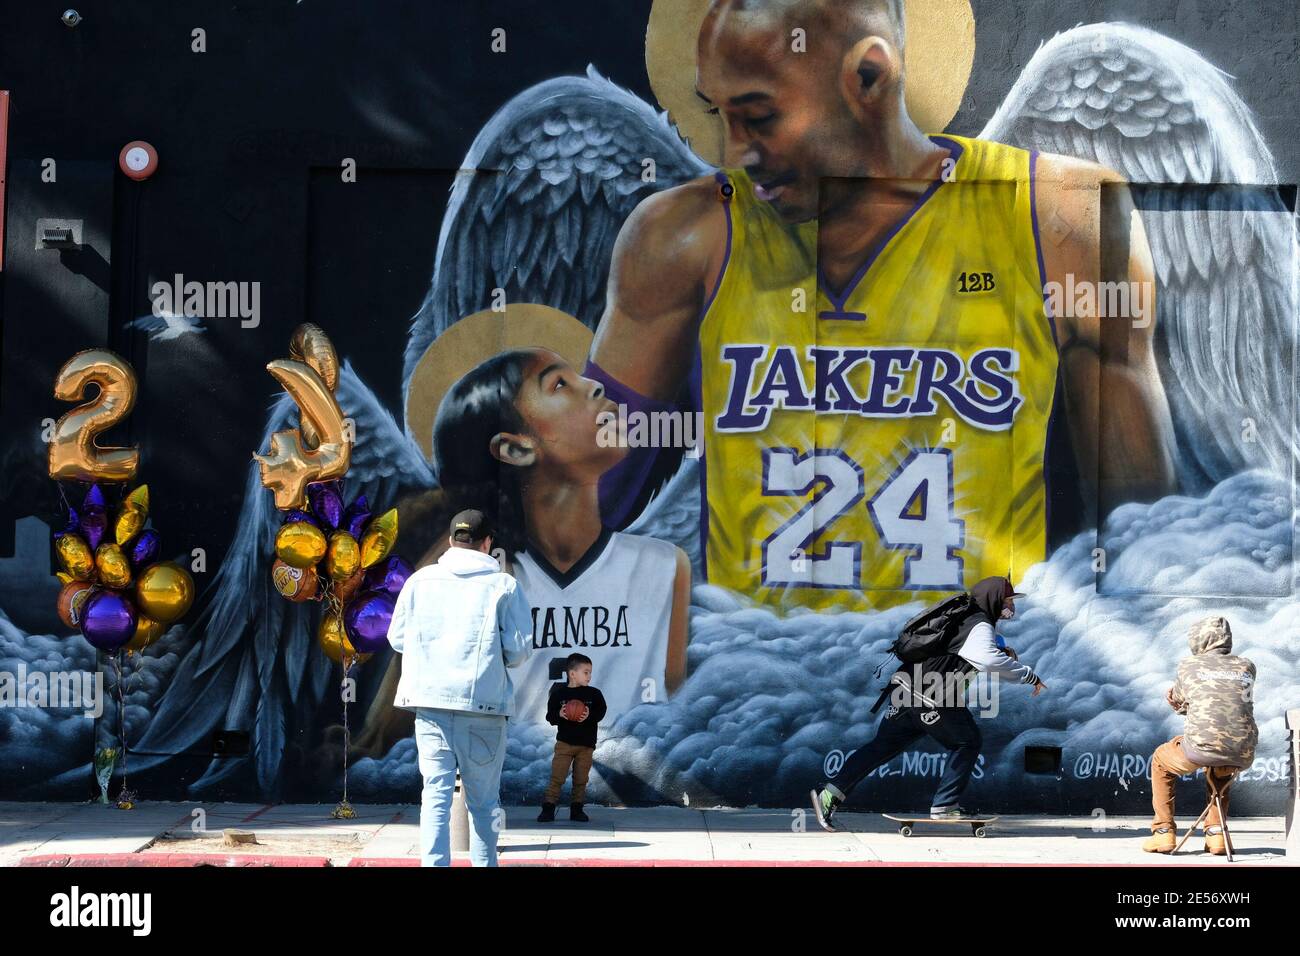 Los Angeles, California, USA. 26th Jan, 2021. A man and a kid take pictures in front of a mural honoring NBA star Kobe Bryant and his daughter Gigi near Staples Center in downtown Los Angeles, Tuesday, Jan. 26, 2021. Credit: Ringo Chiu/ZUMA Wire/Alamy Live News Stock Photo